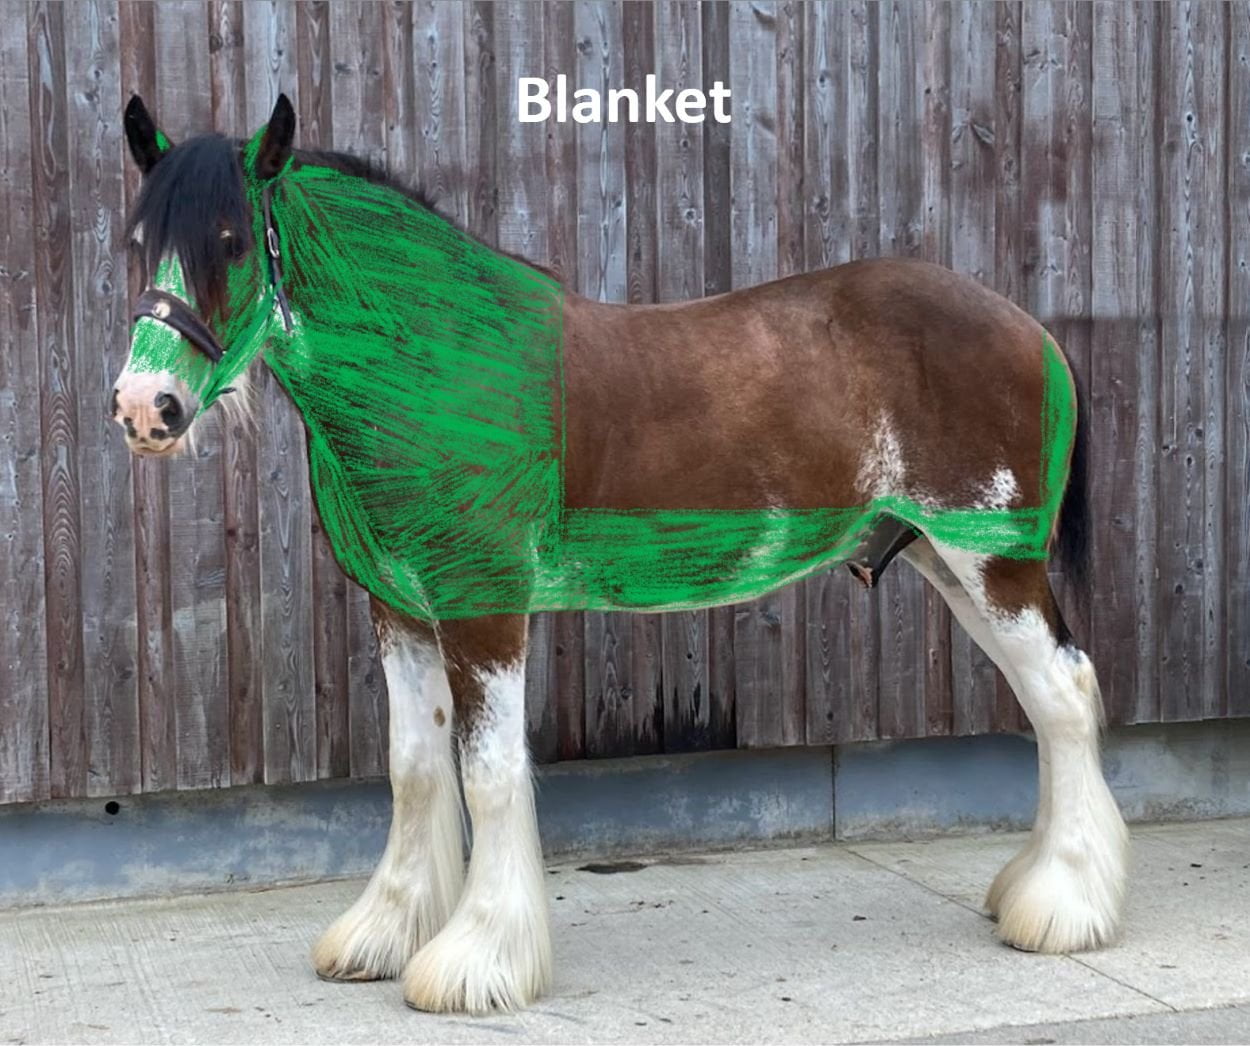 Clydesdale displaying a blanket clip